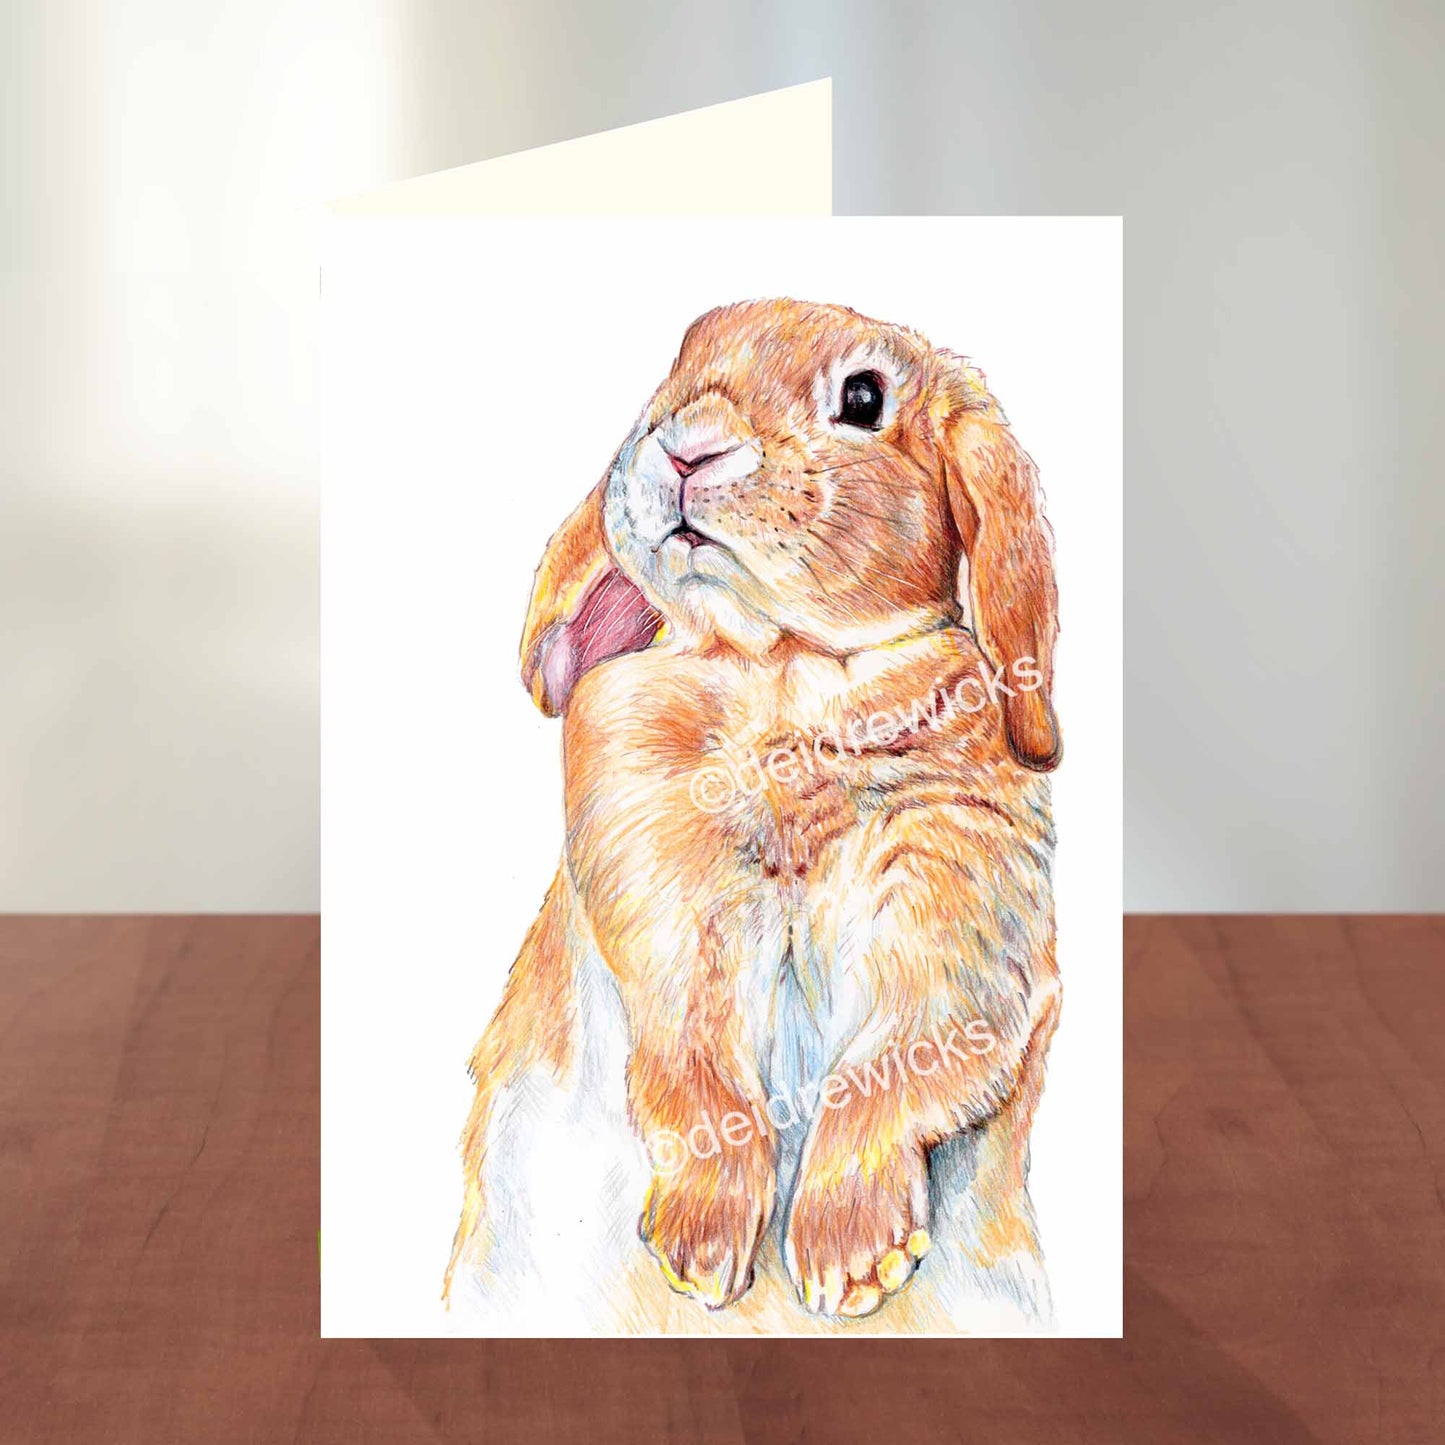 Blank Greeting card featuring a lop eared bunny rabbit sniffing the air. Coloured pencil art by Deidre Wicks